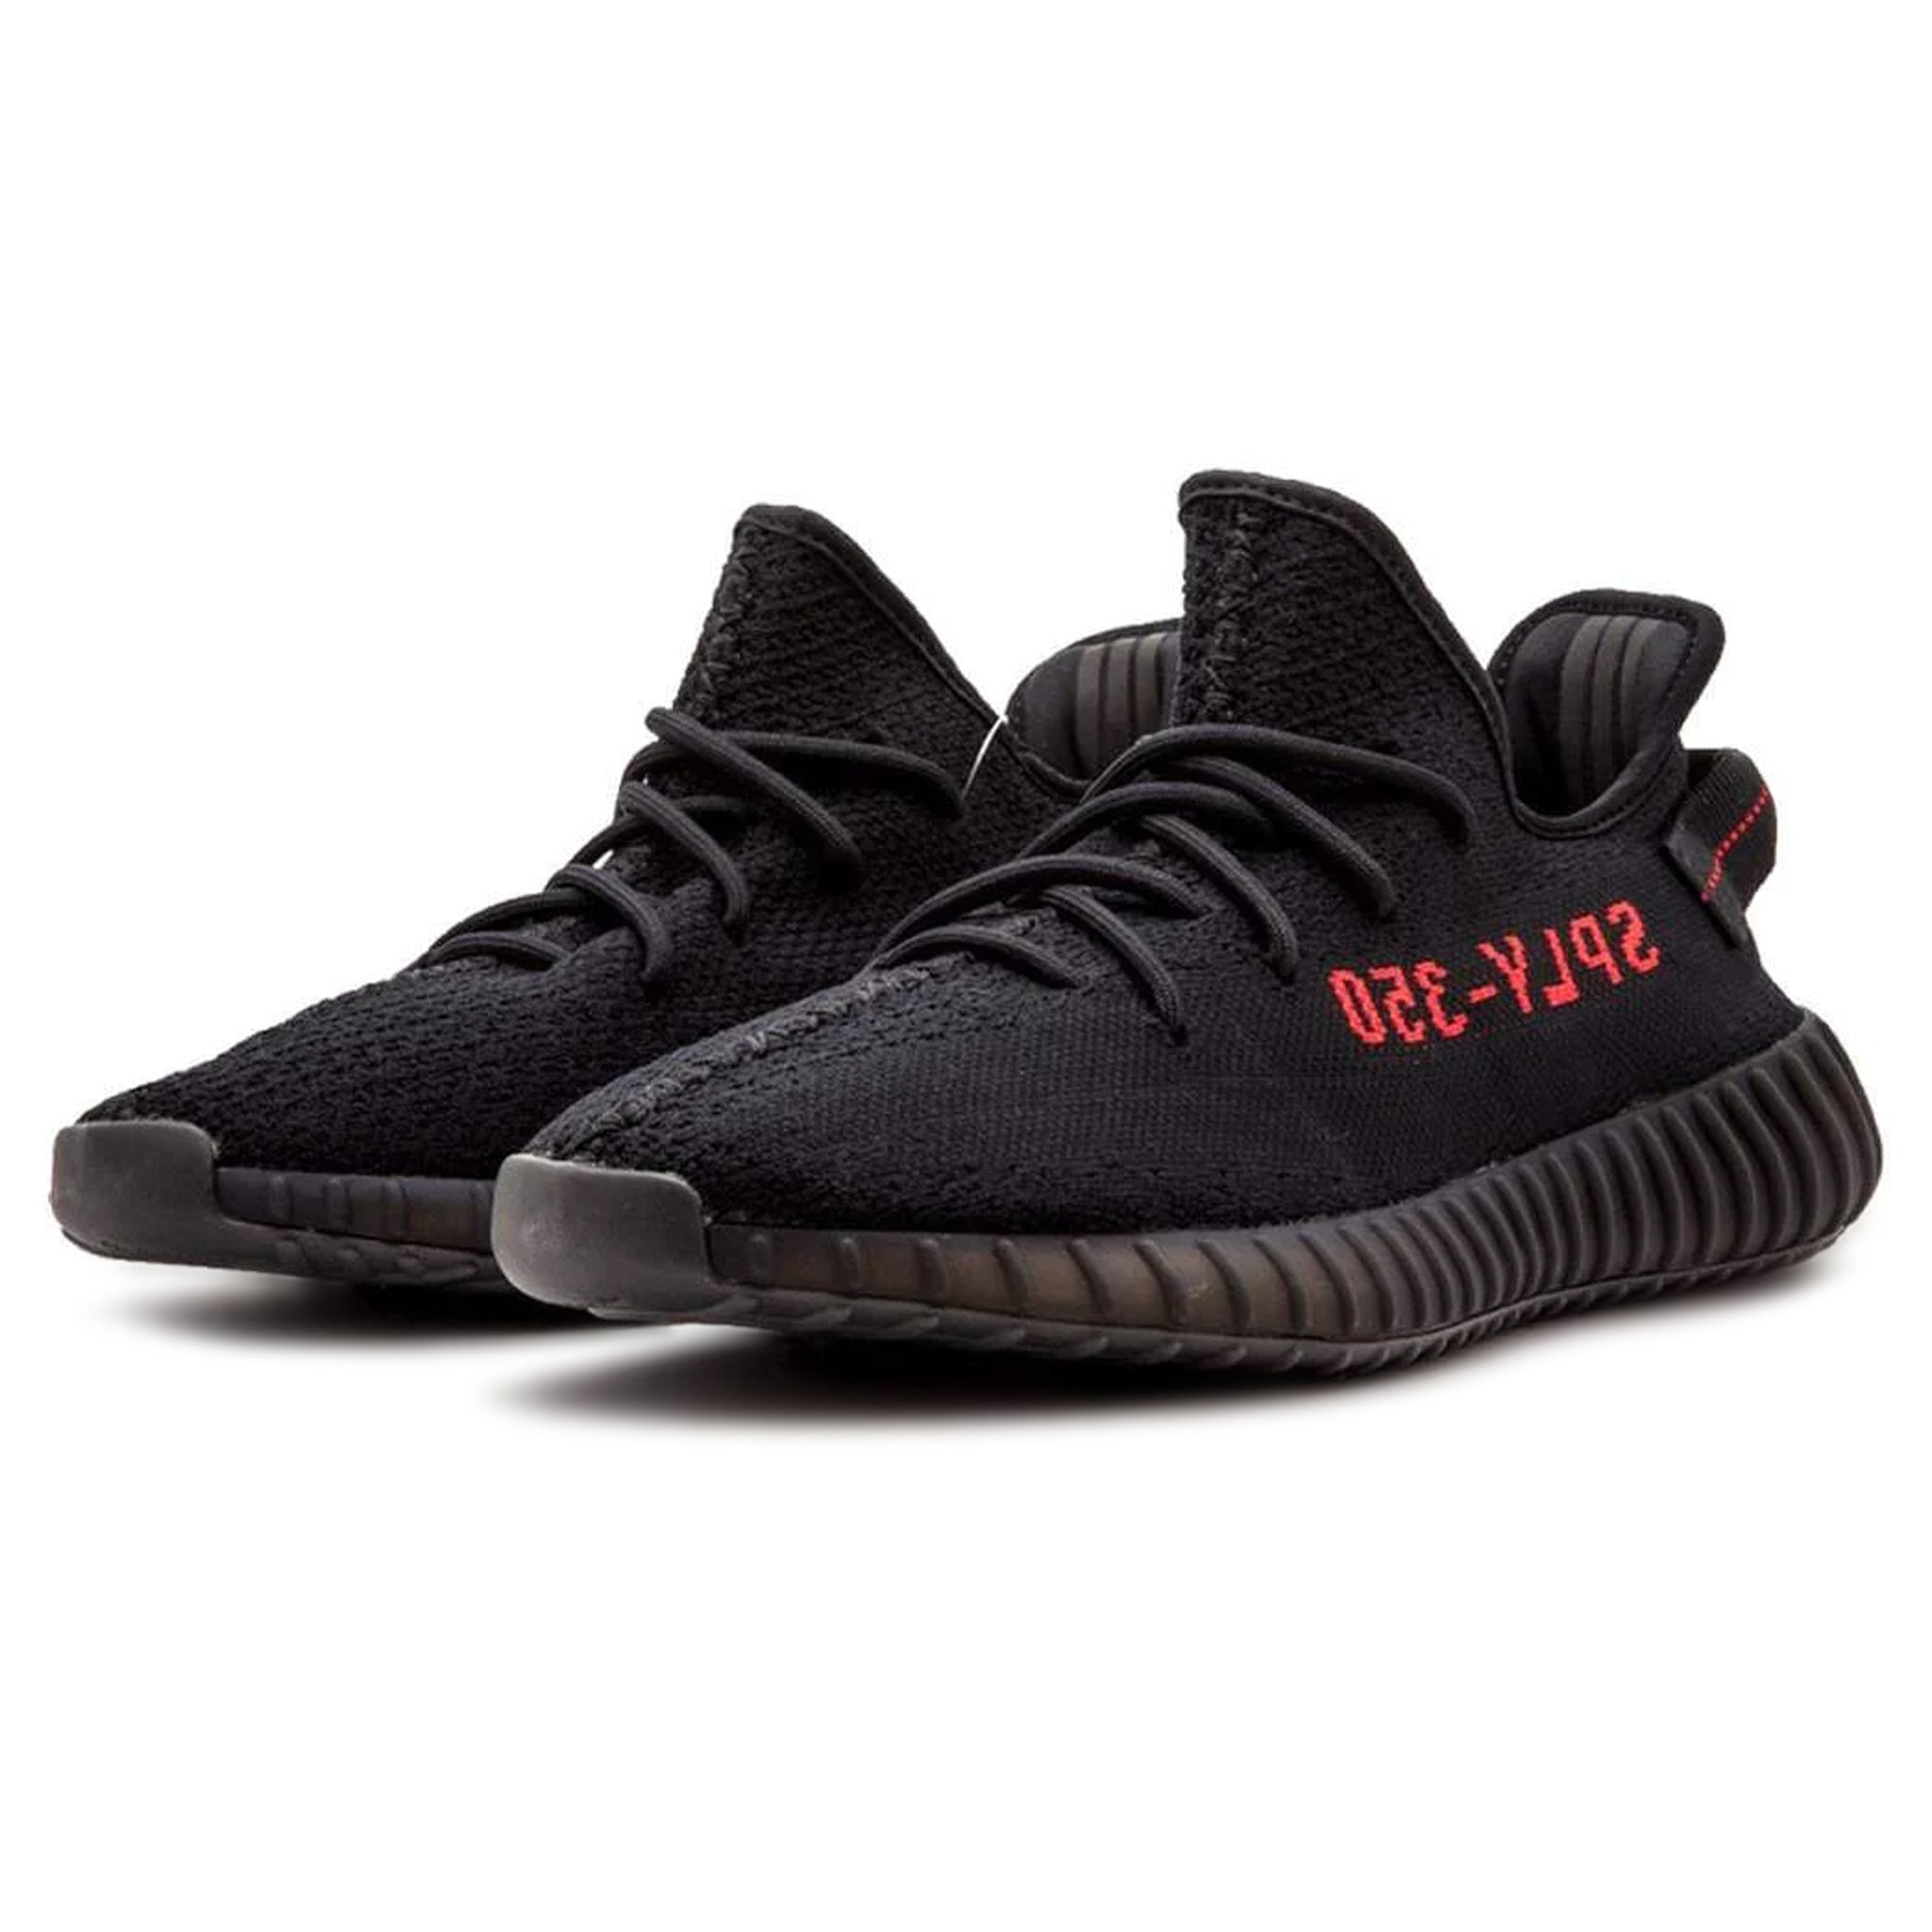 Front side view of Adidas Yeezy Boost 350 V2 Bred Core Black Red CP9652